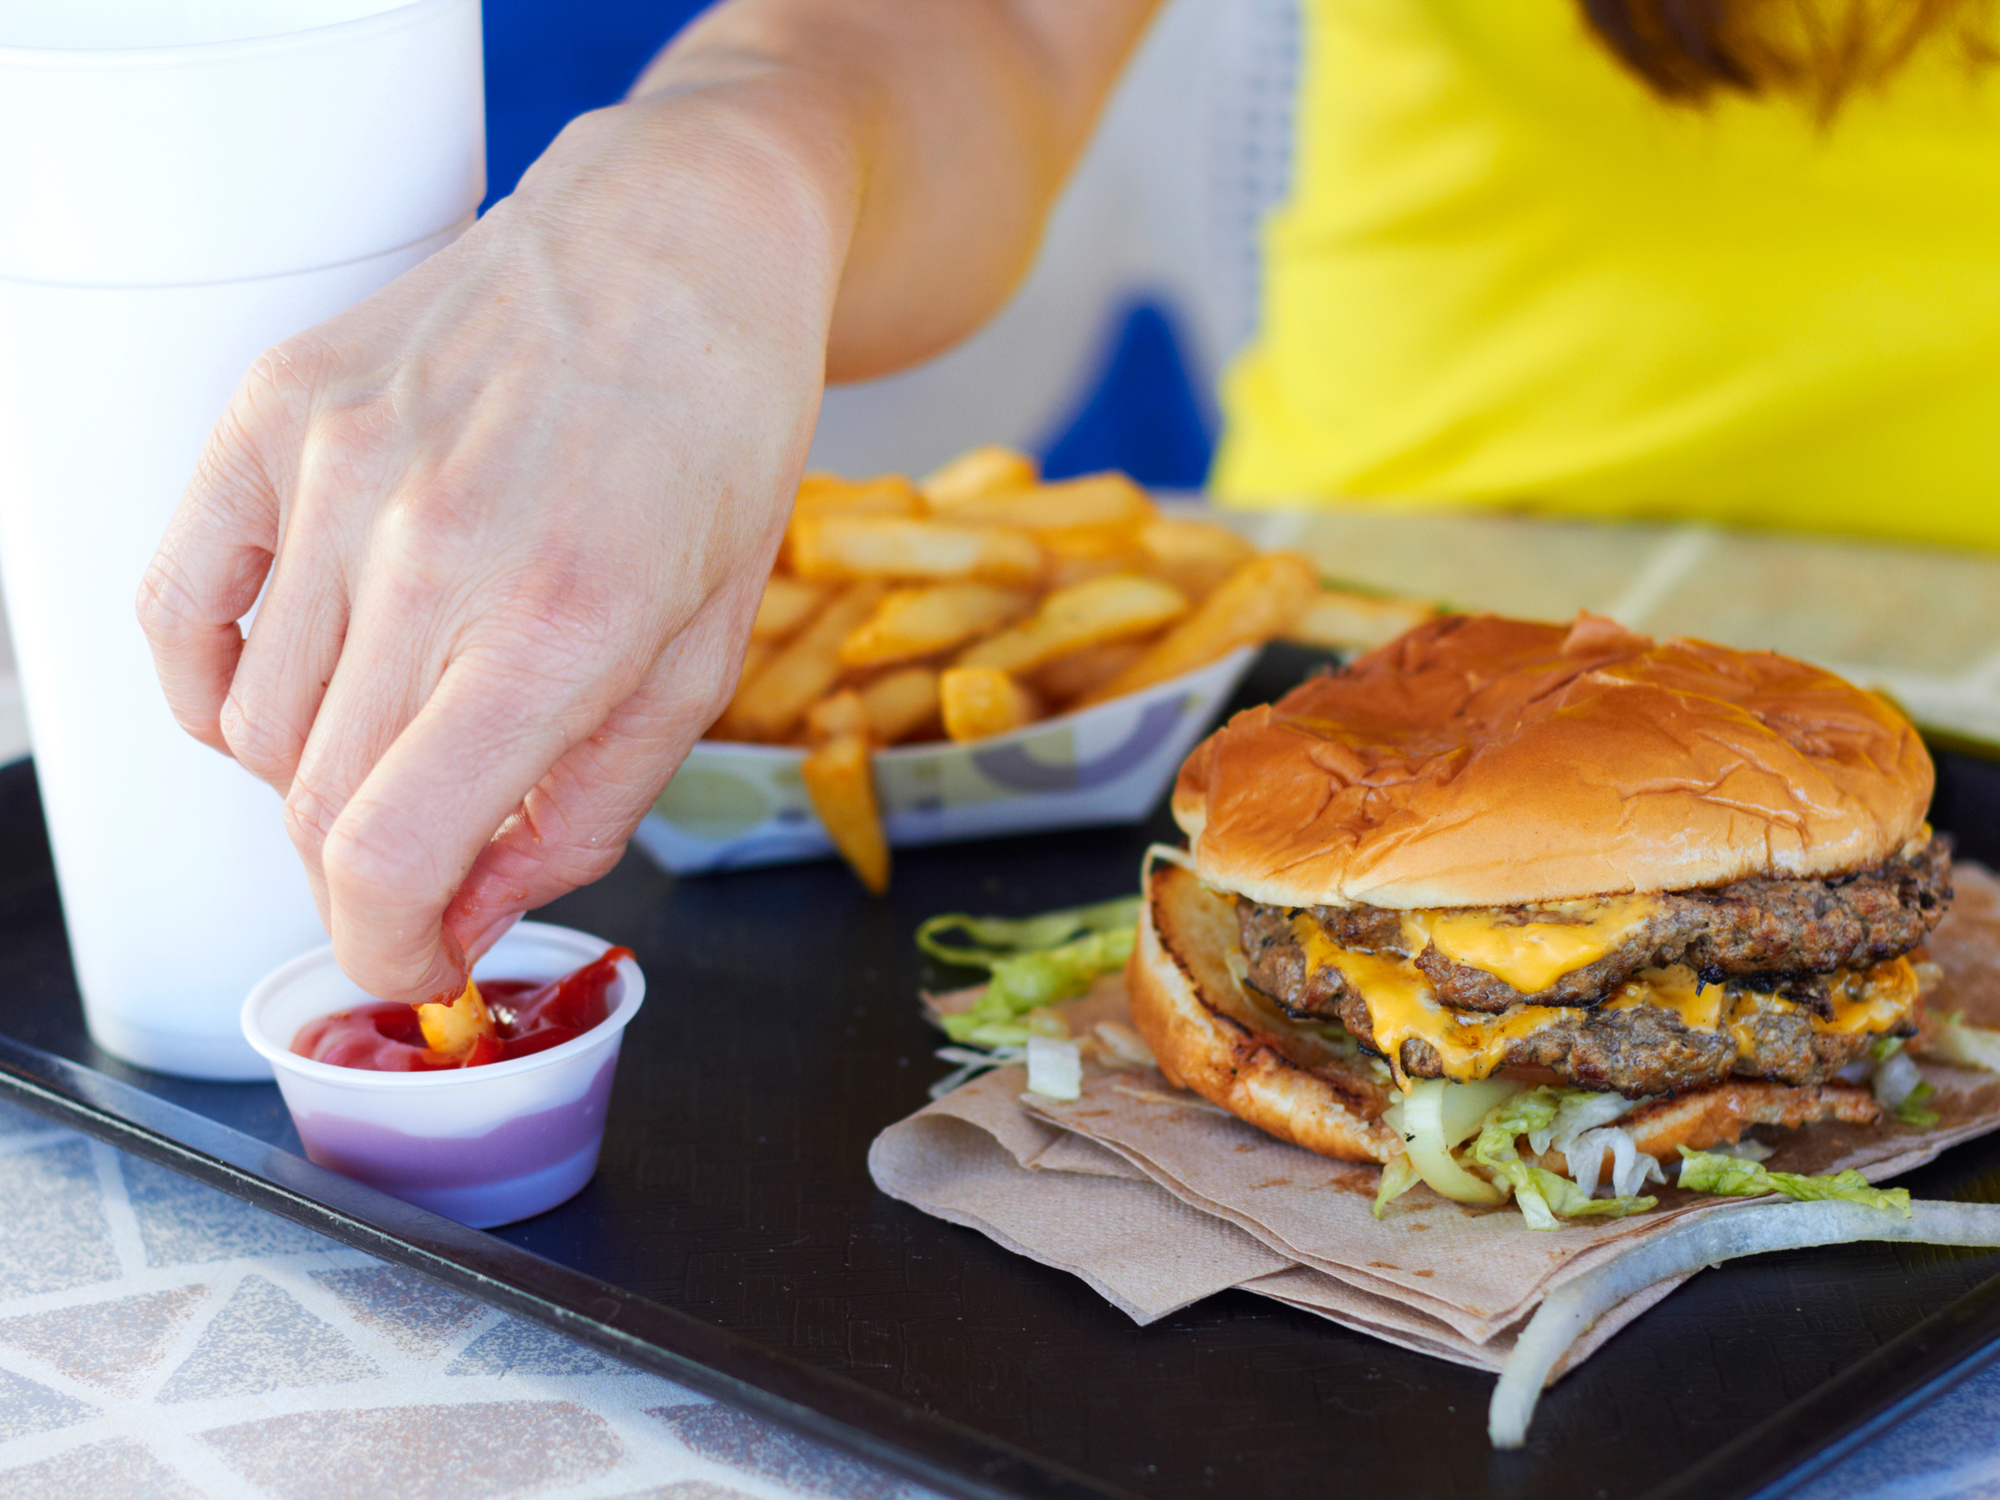 Easy fix counters the damage of a fast food binge